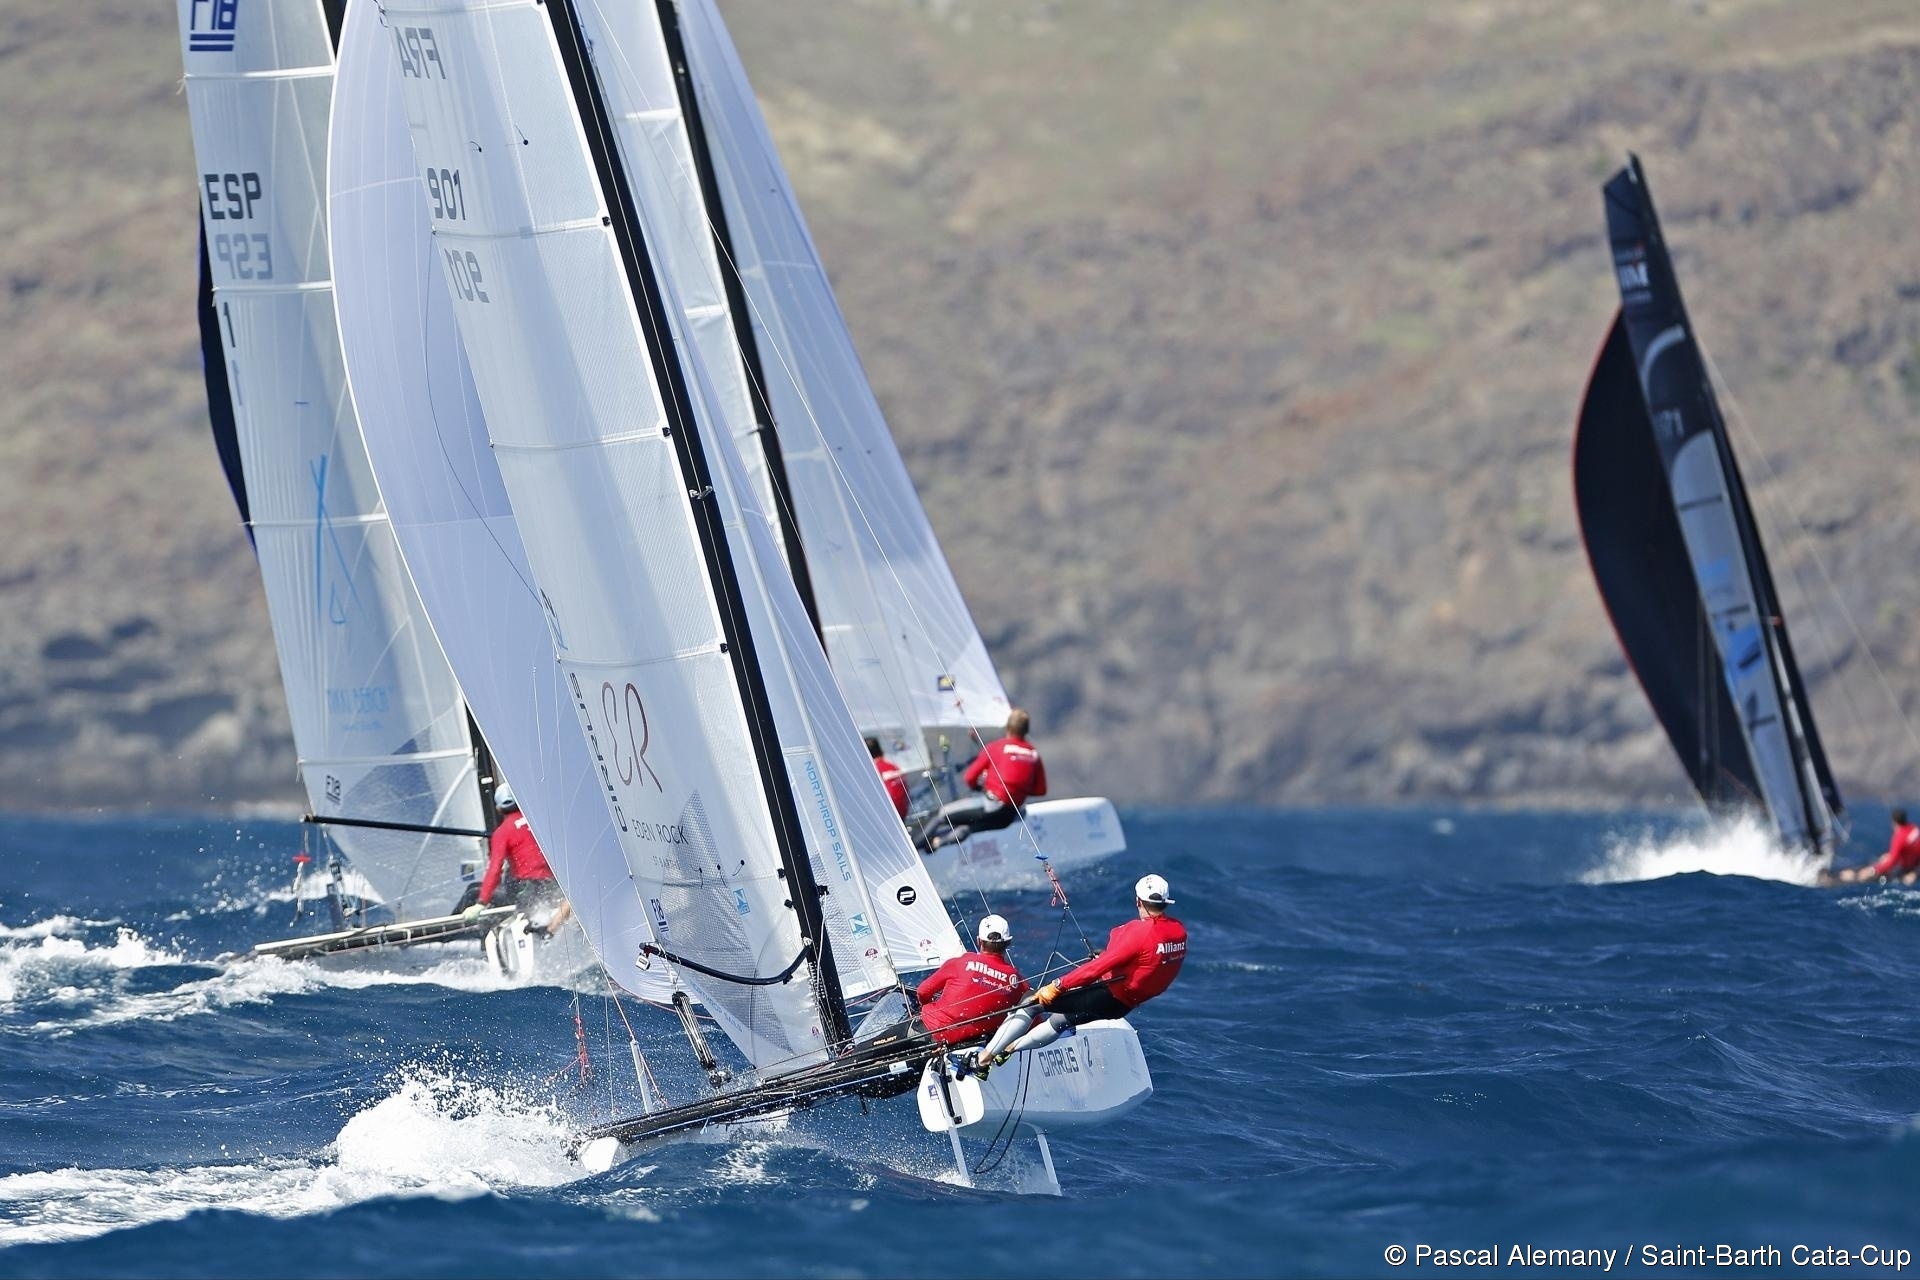  Multihulls  StBarth Cata Cup 2018  StBarthelemy FRA  Final results